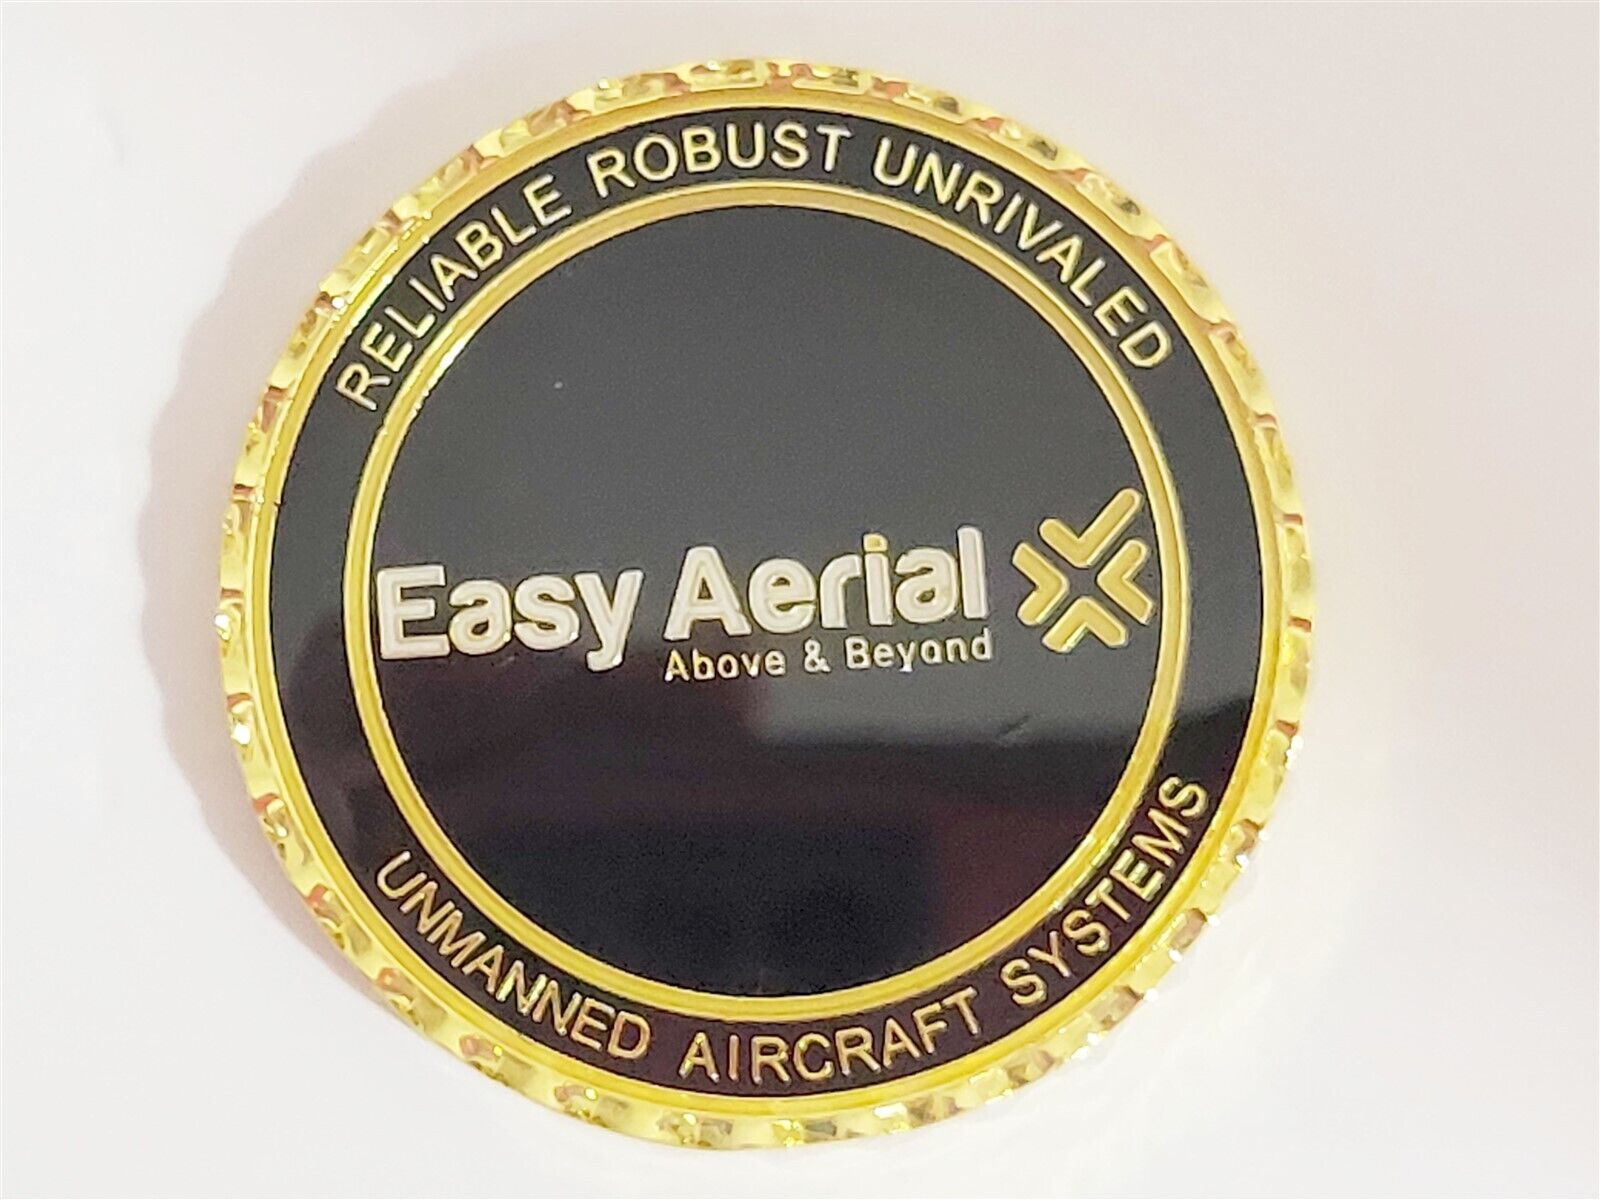 Easy Aerial Above and Beyond / Unmanned Aircraft Systems Challenge Coin